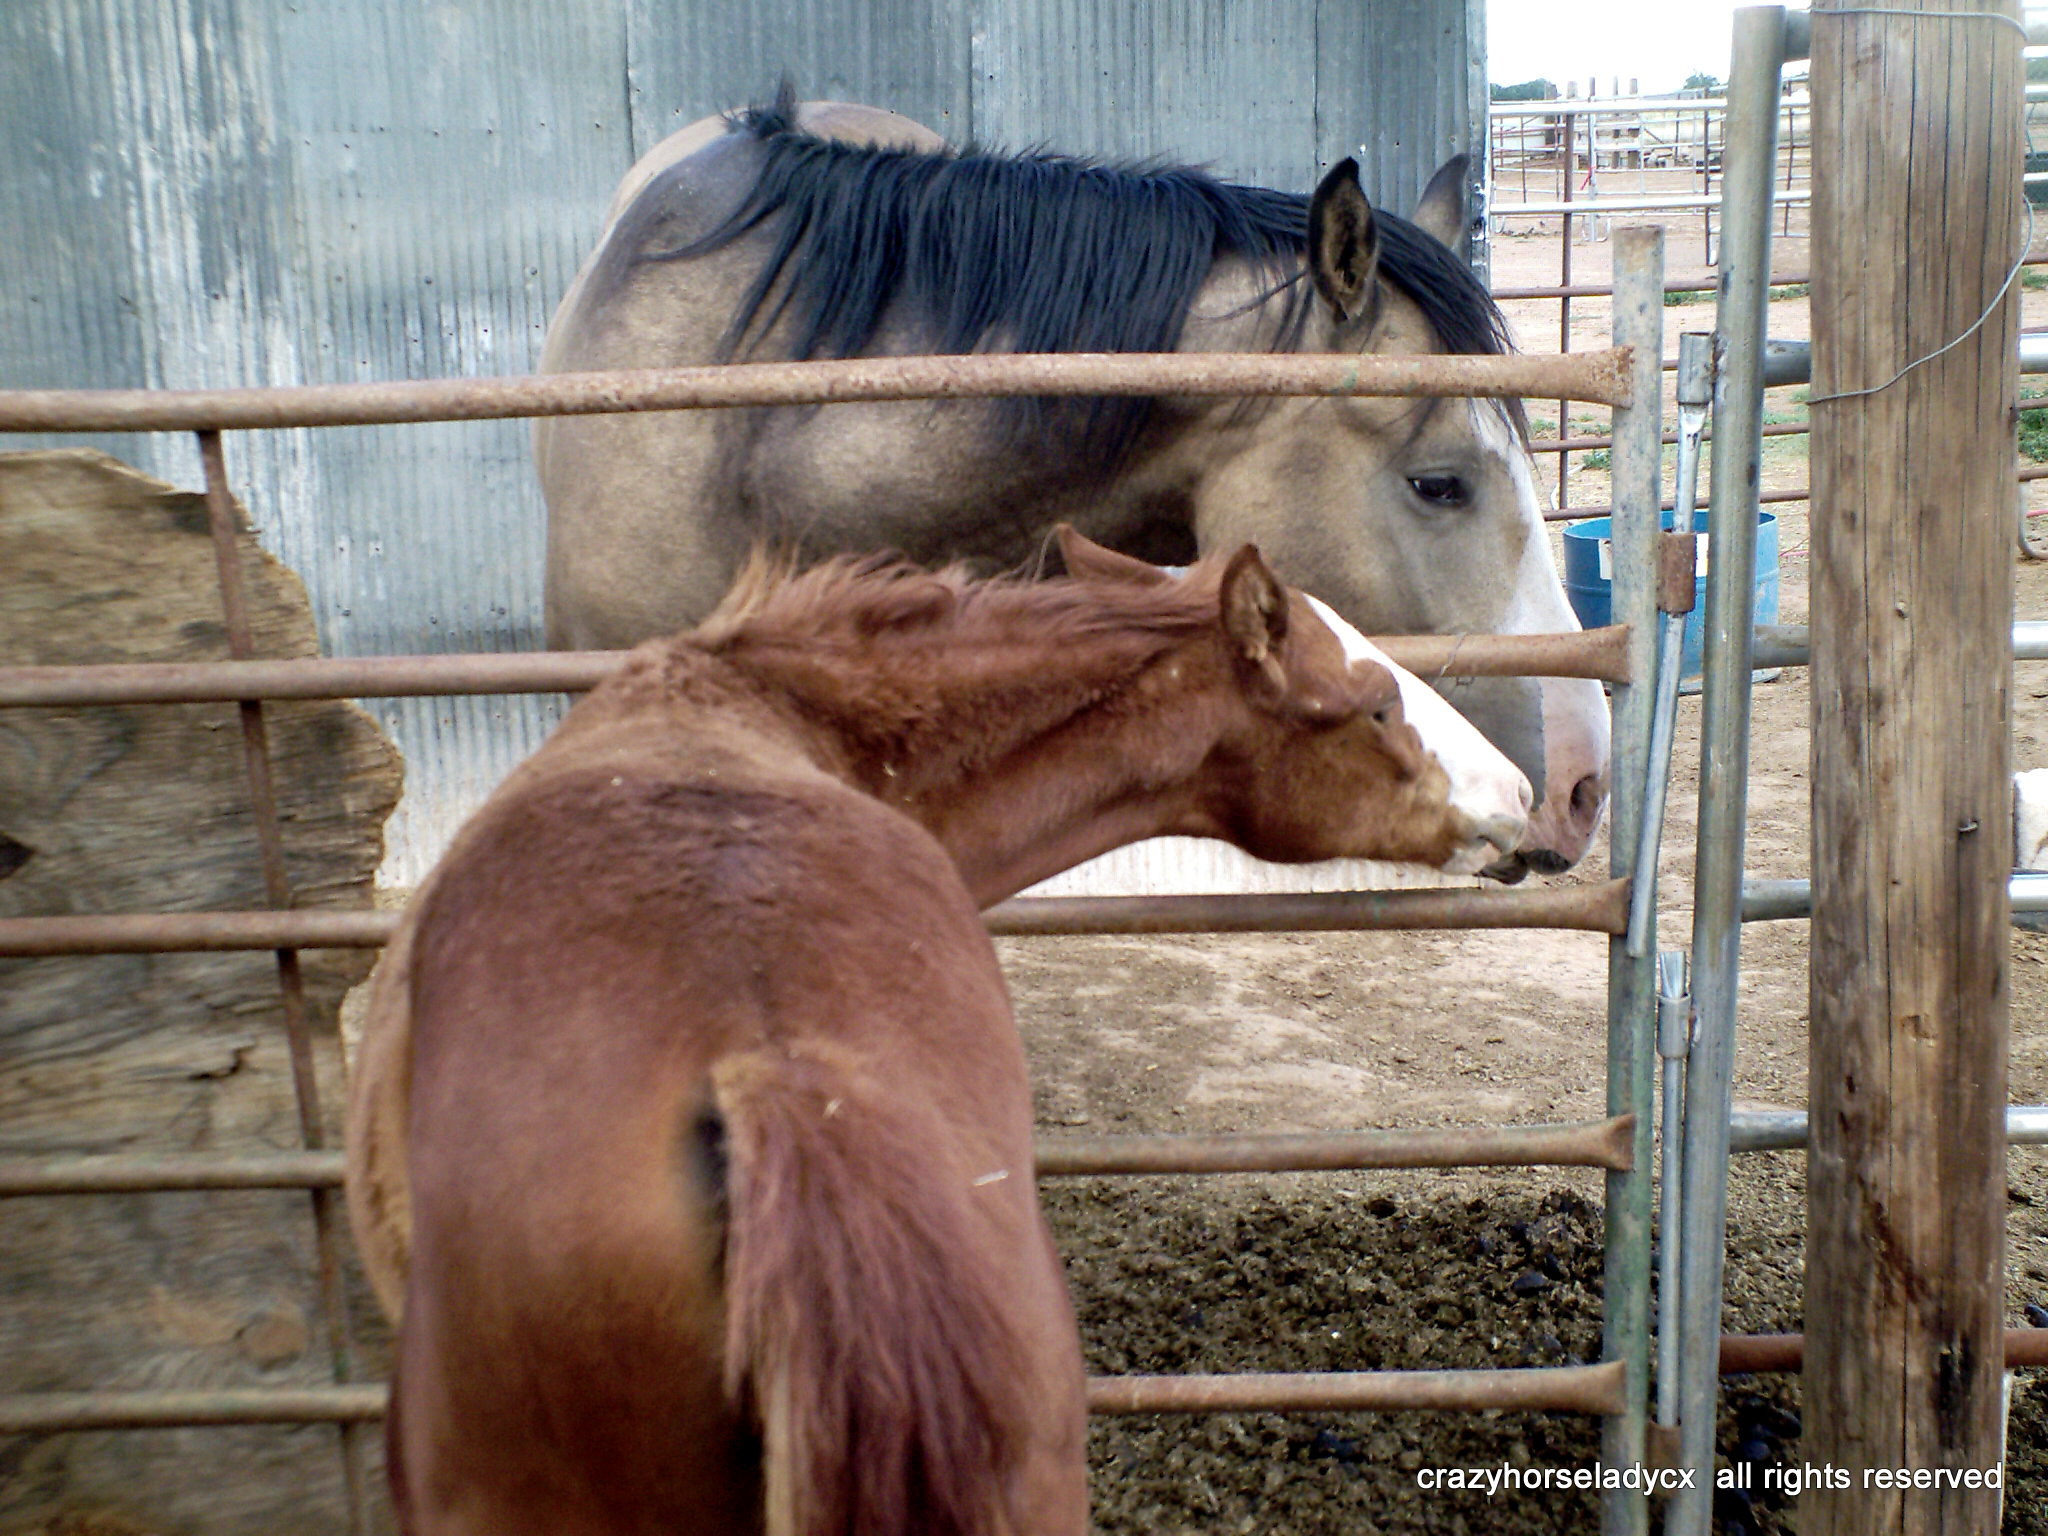 Mr. Rocky &#039;s a 3 week ol&#039; mustang orphan with Mr. Cisco, also a mustang ripped from their homelands &#039;n family ~ crazyhorseladycx